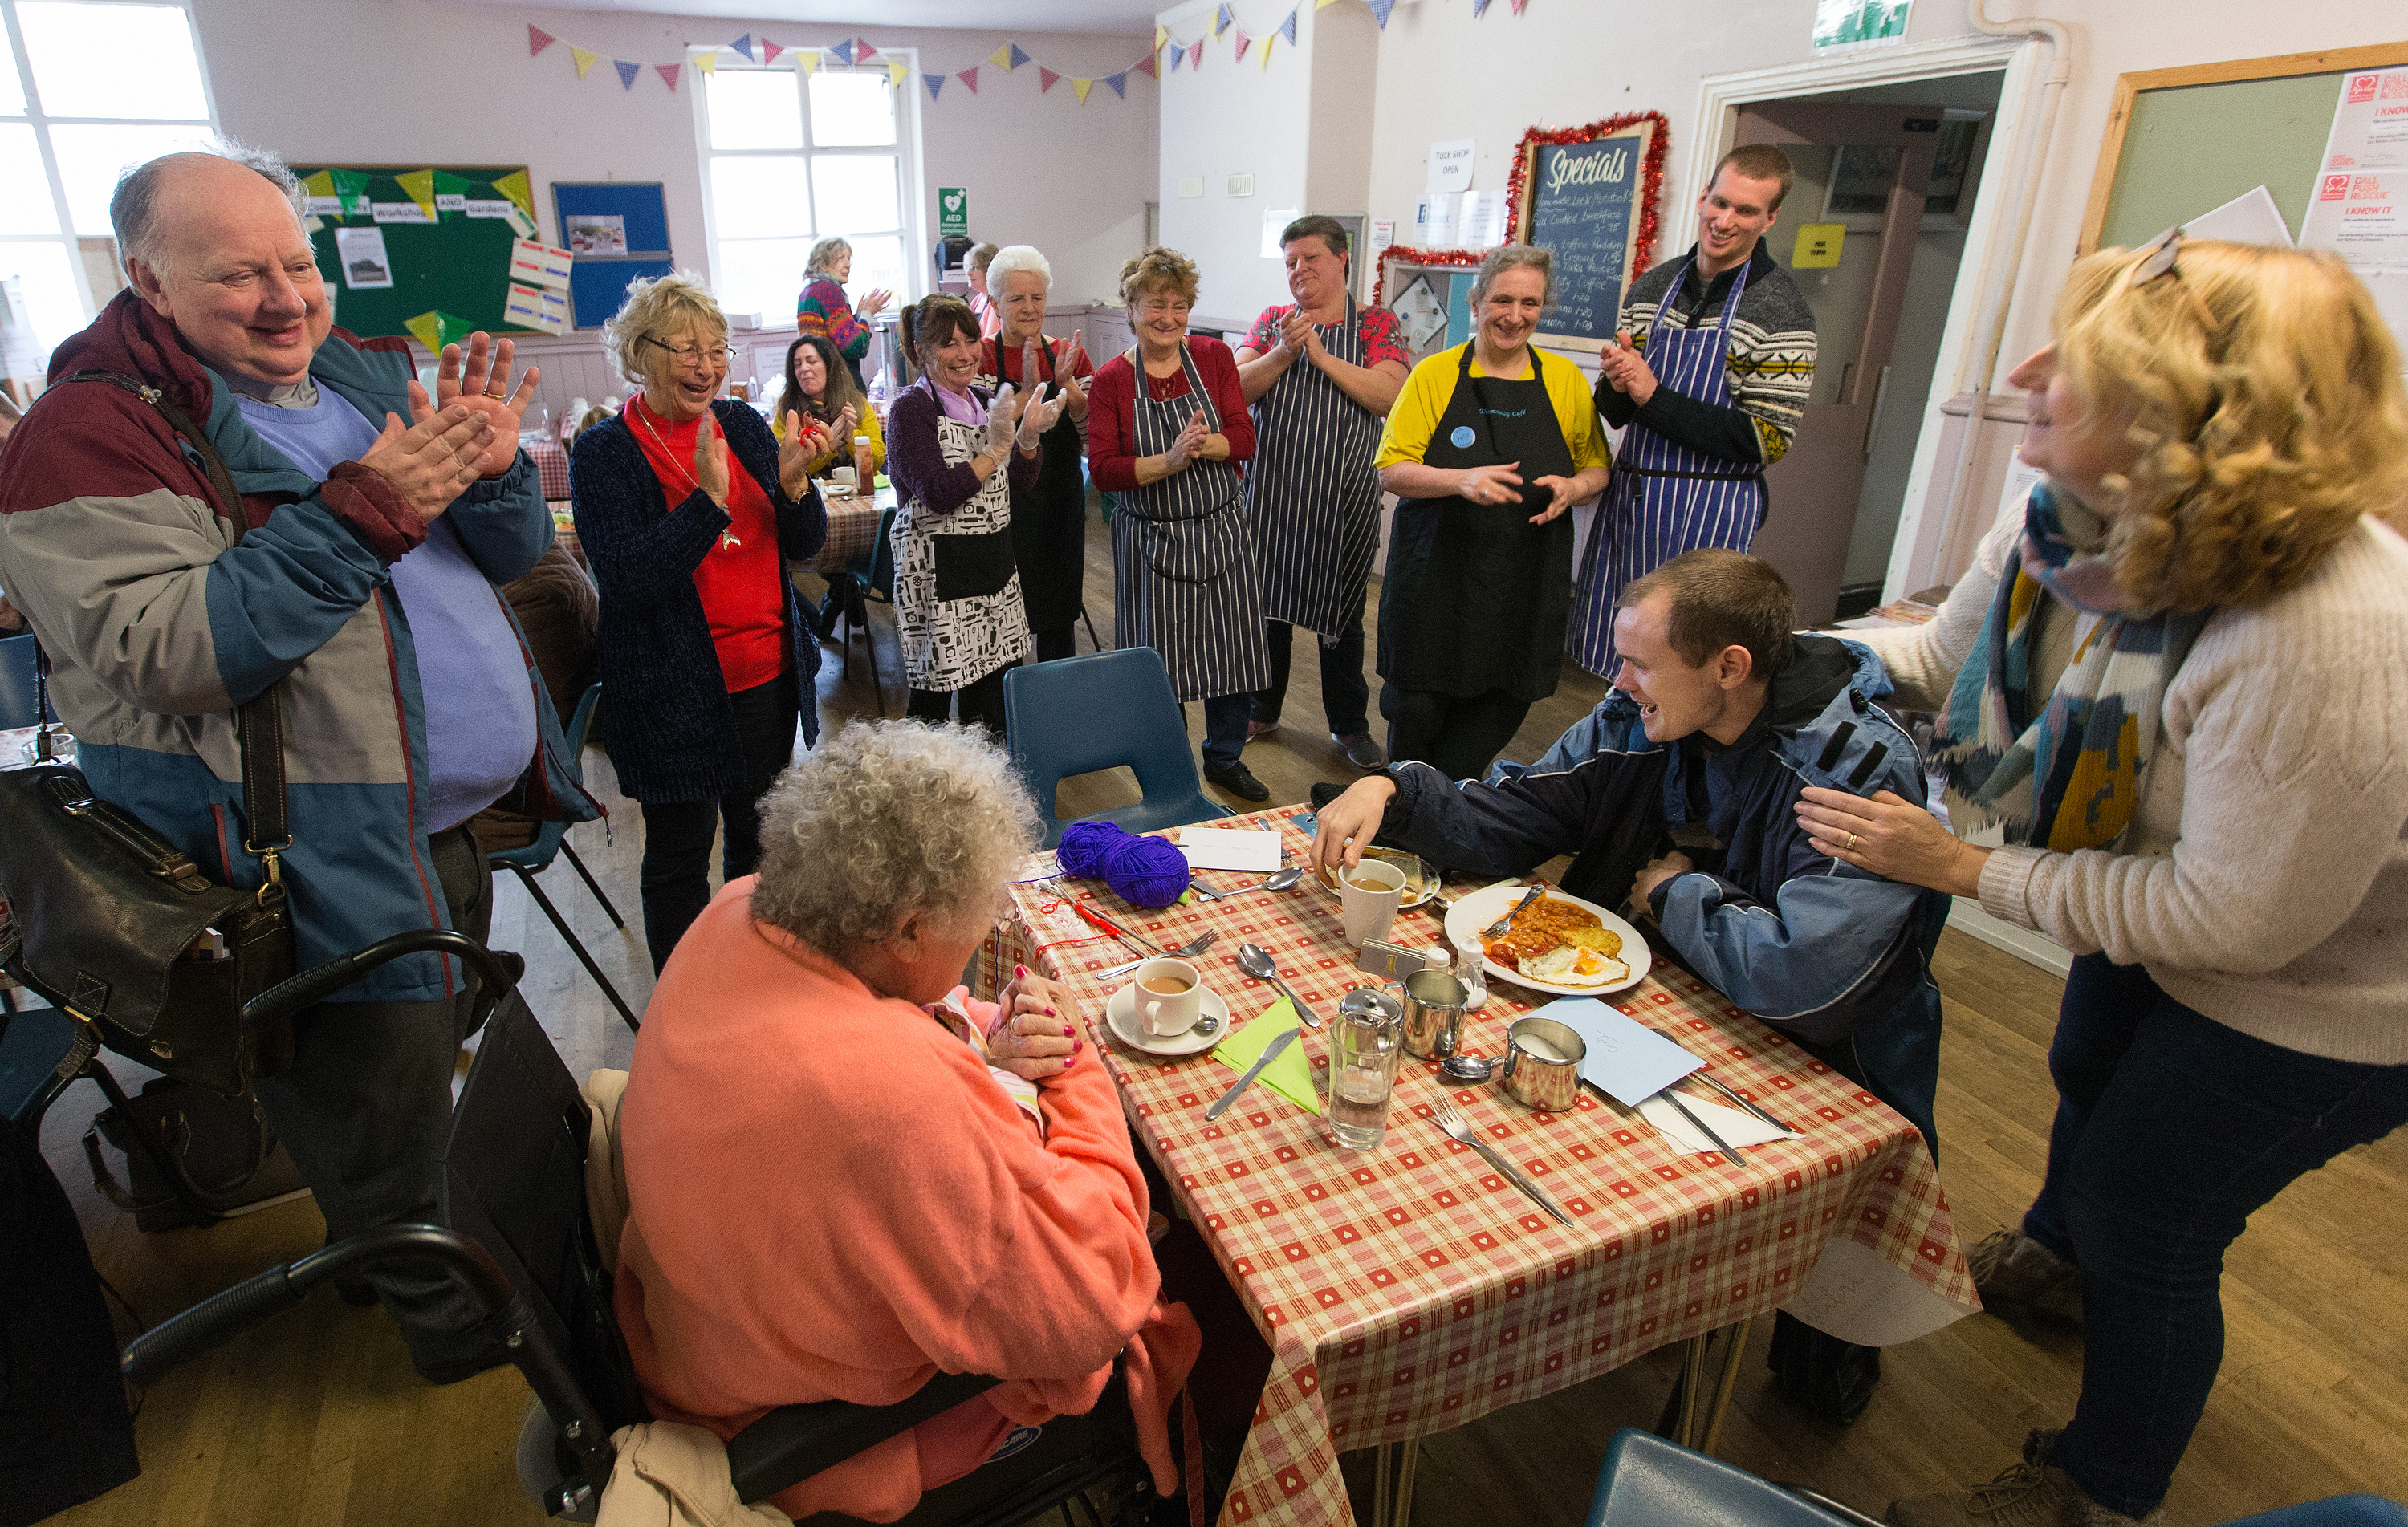 Community members, staff and volunteers wish Craig Kirwin (seated, right) a happy birthday during the twice-weekly community café at Wharton and Cleggs Lane Church and Community Centre in Little Hulton, England. Photo by Mike DuBose, UMNS.